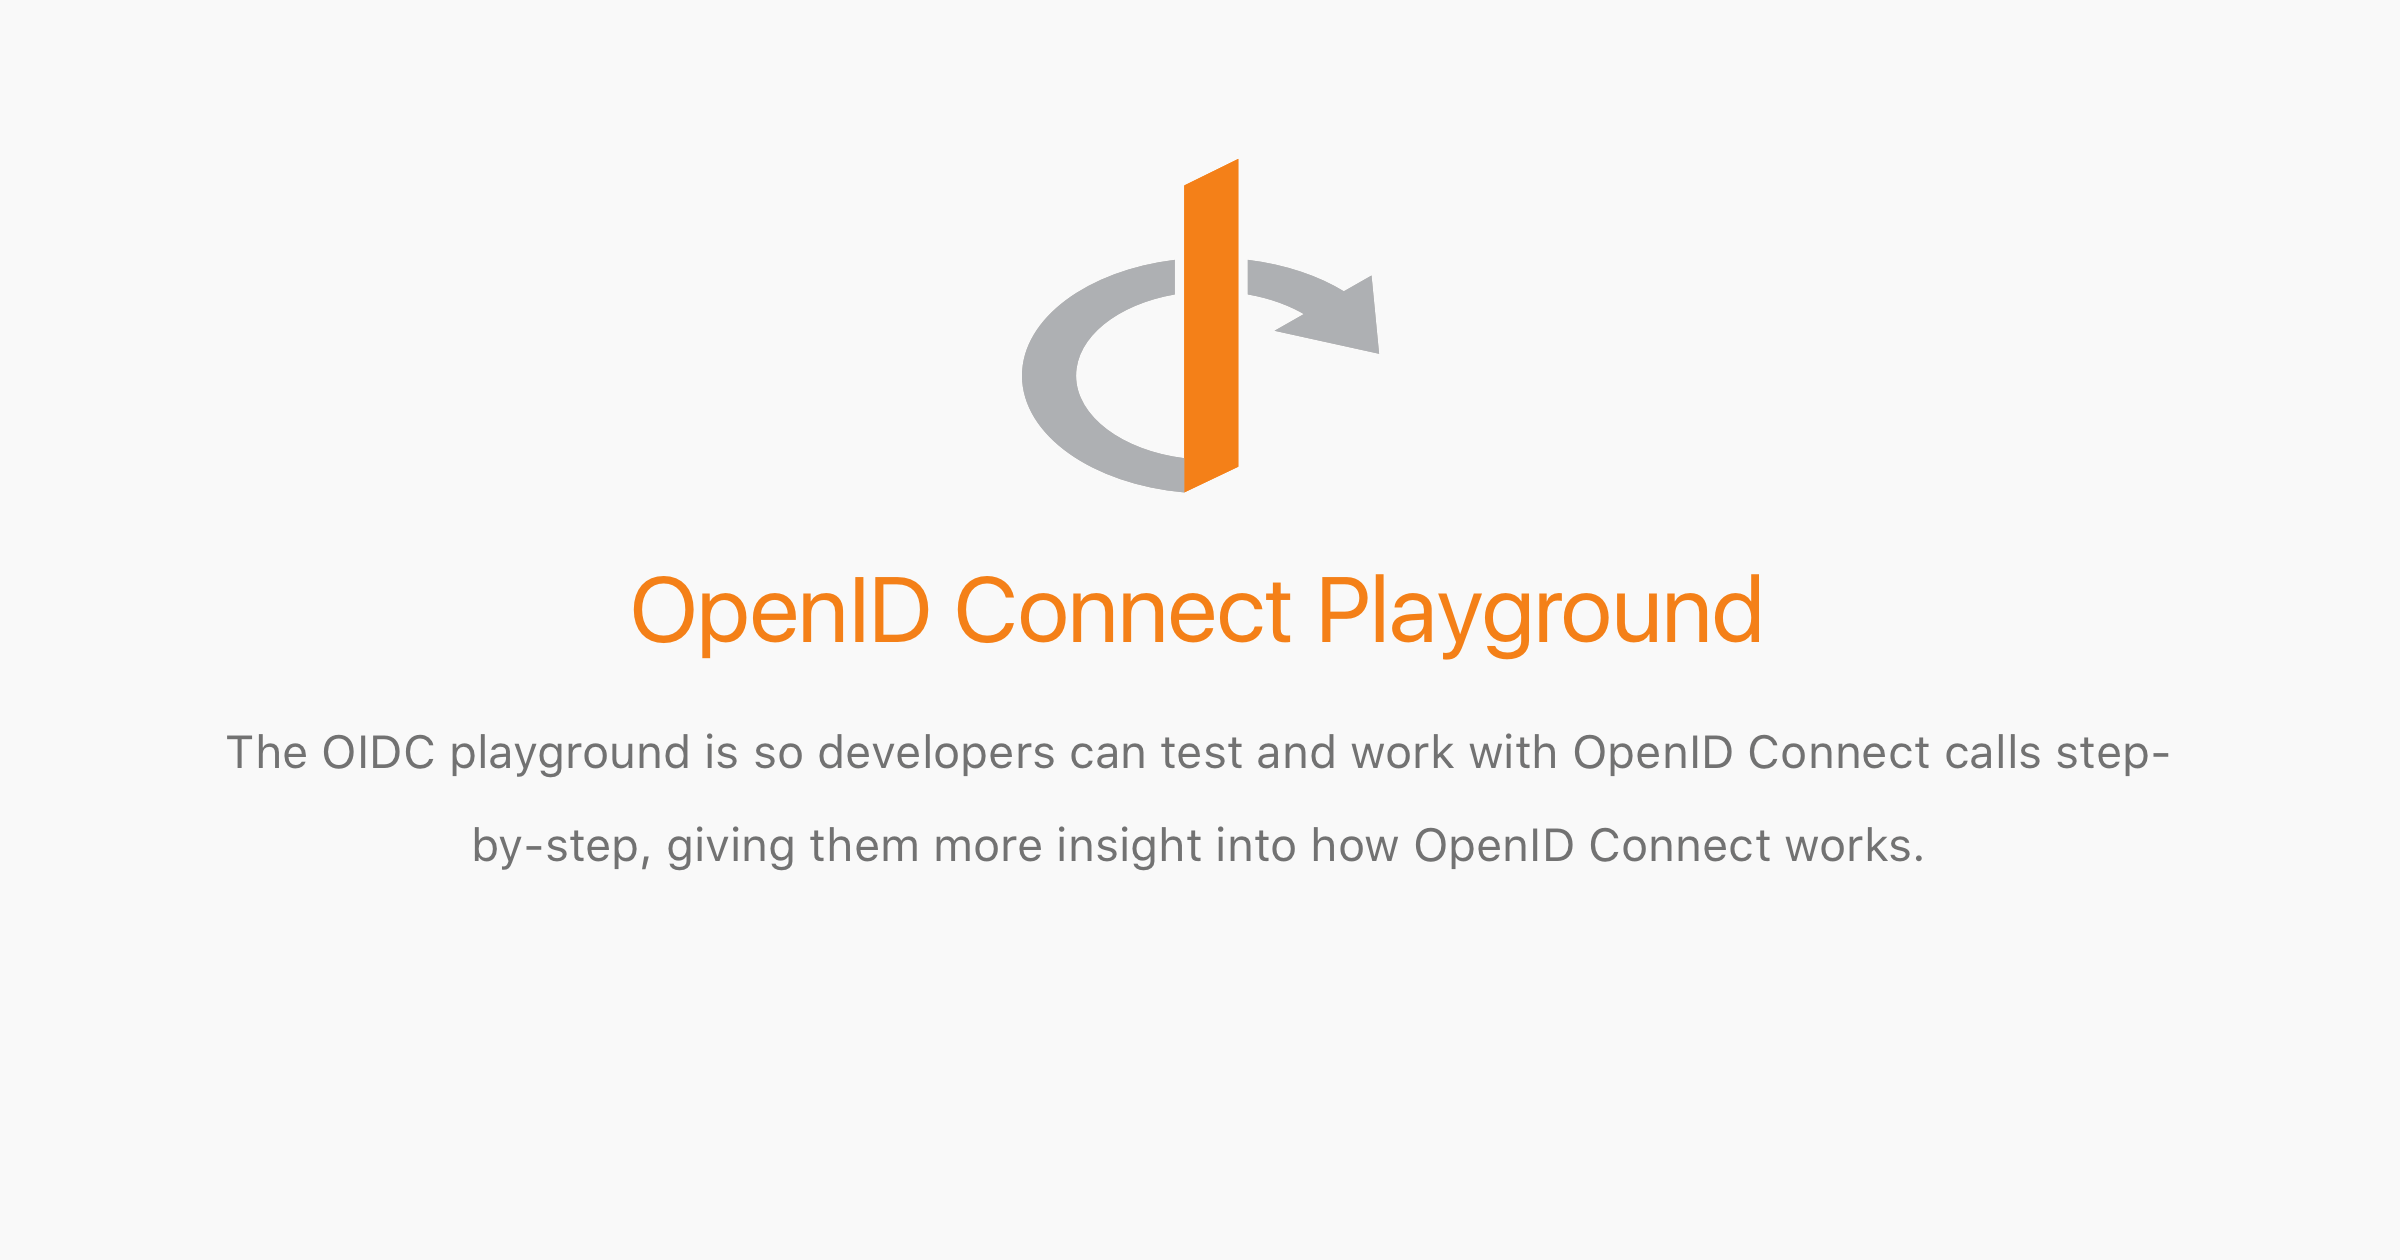 openid connect playground